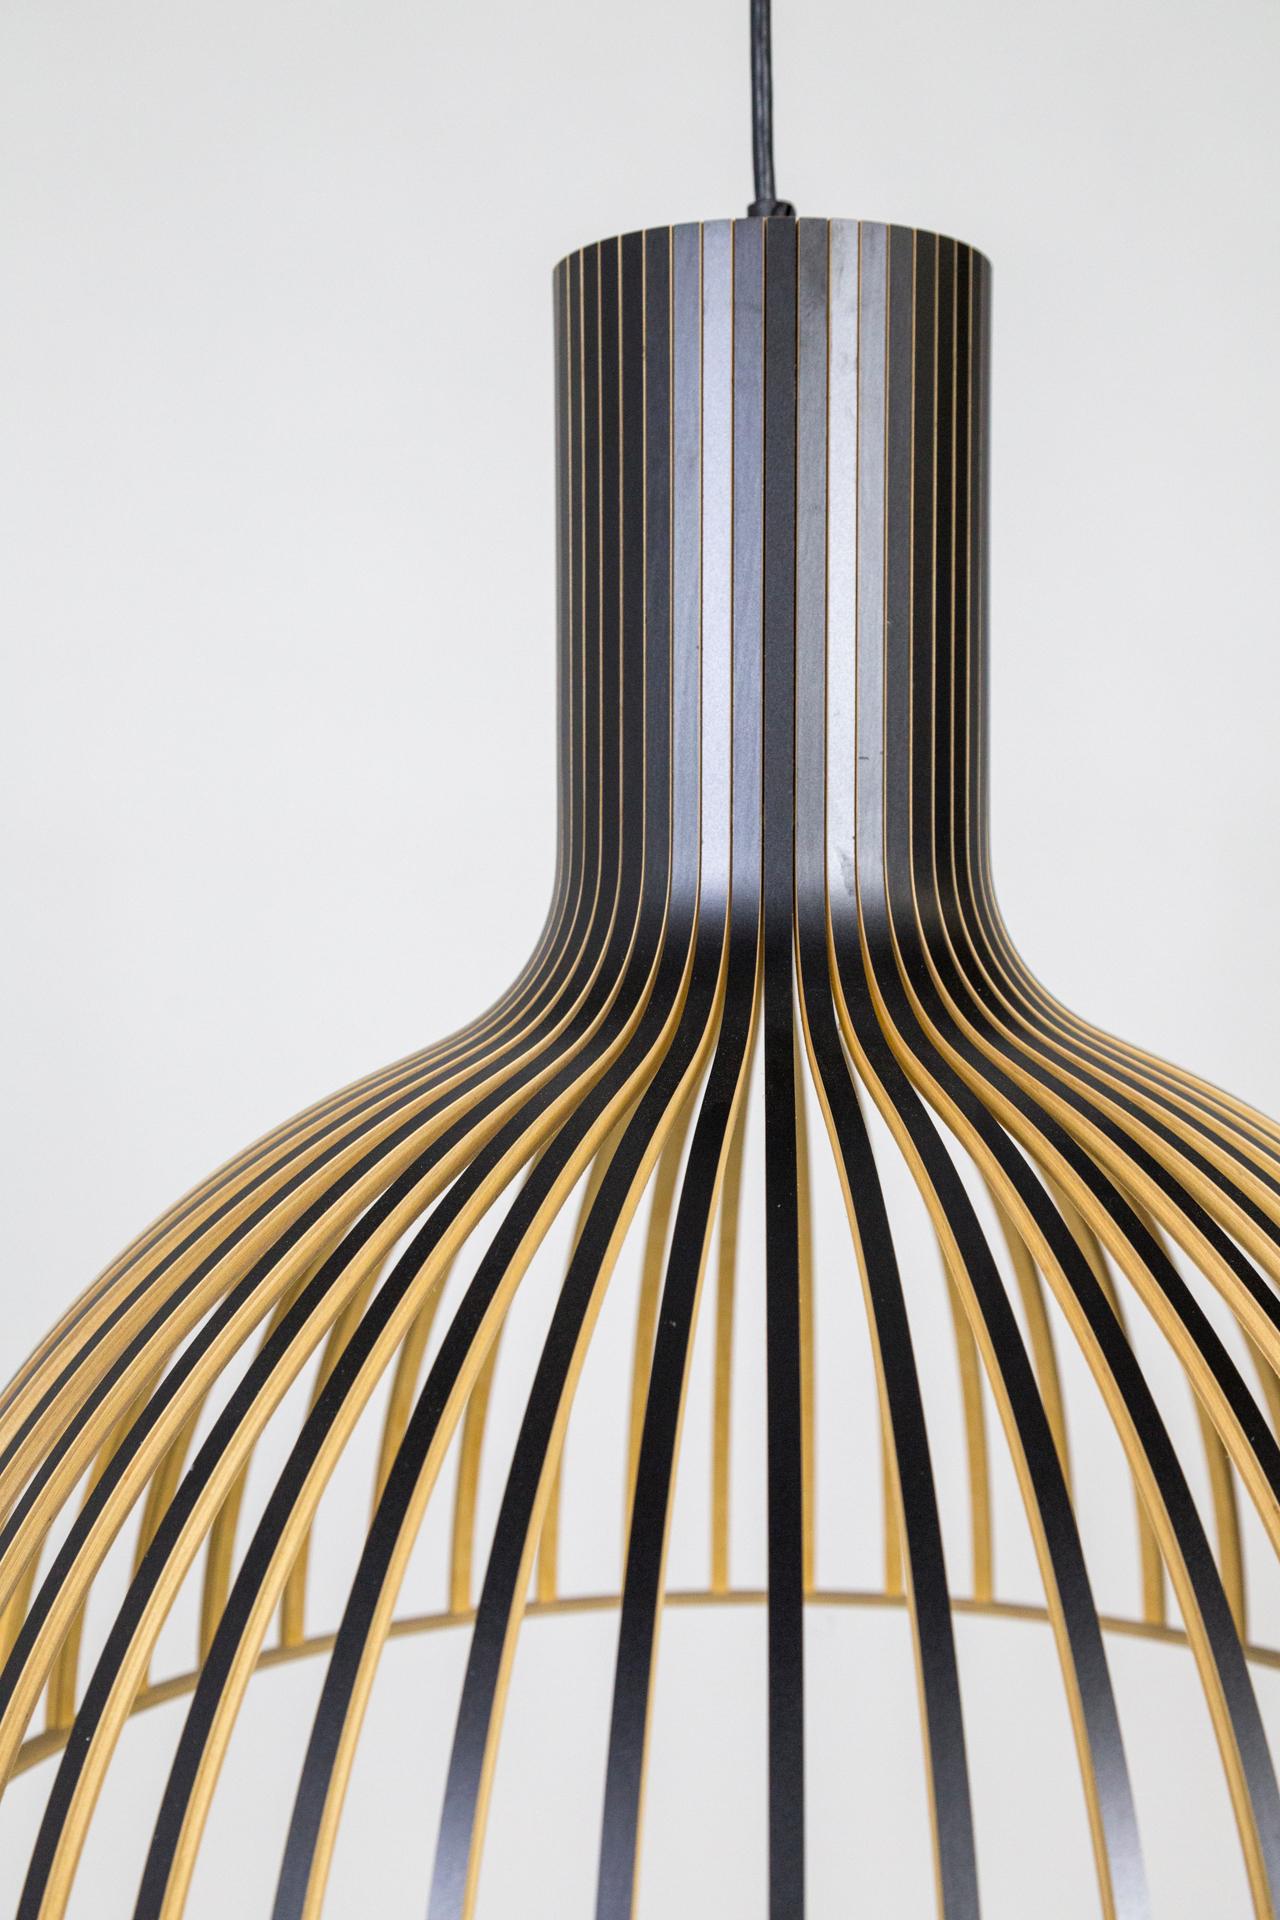 This pendant light features a shade made from black laminated birch slats connected to a plywood ring; suspended with a black cord and canopy. Finland-based Secto Design specializes in modern designer lamps with handmade shades crafted from the